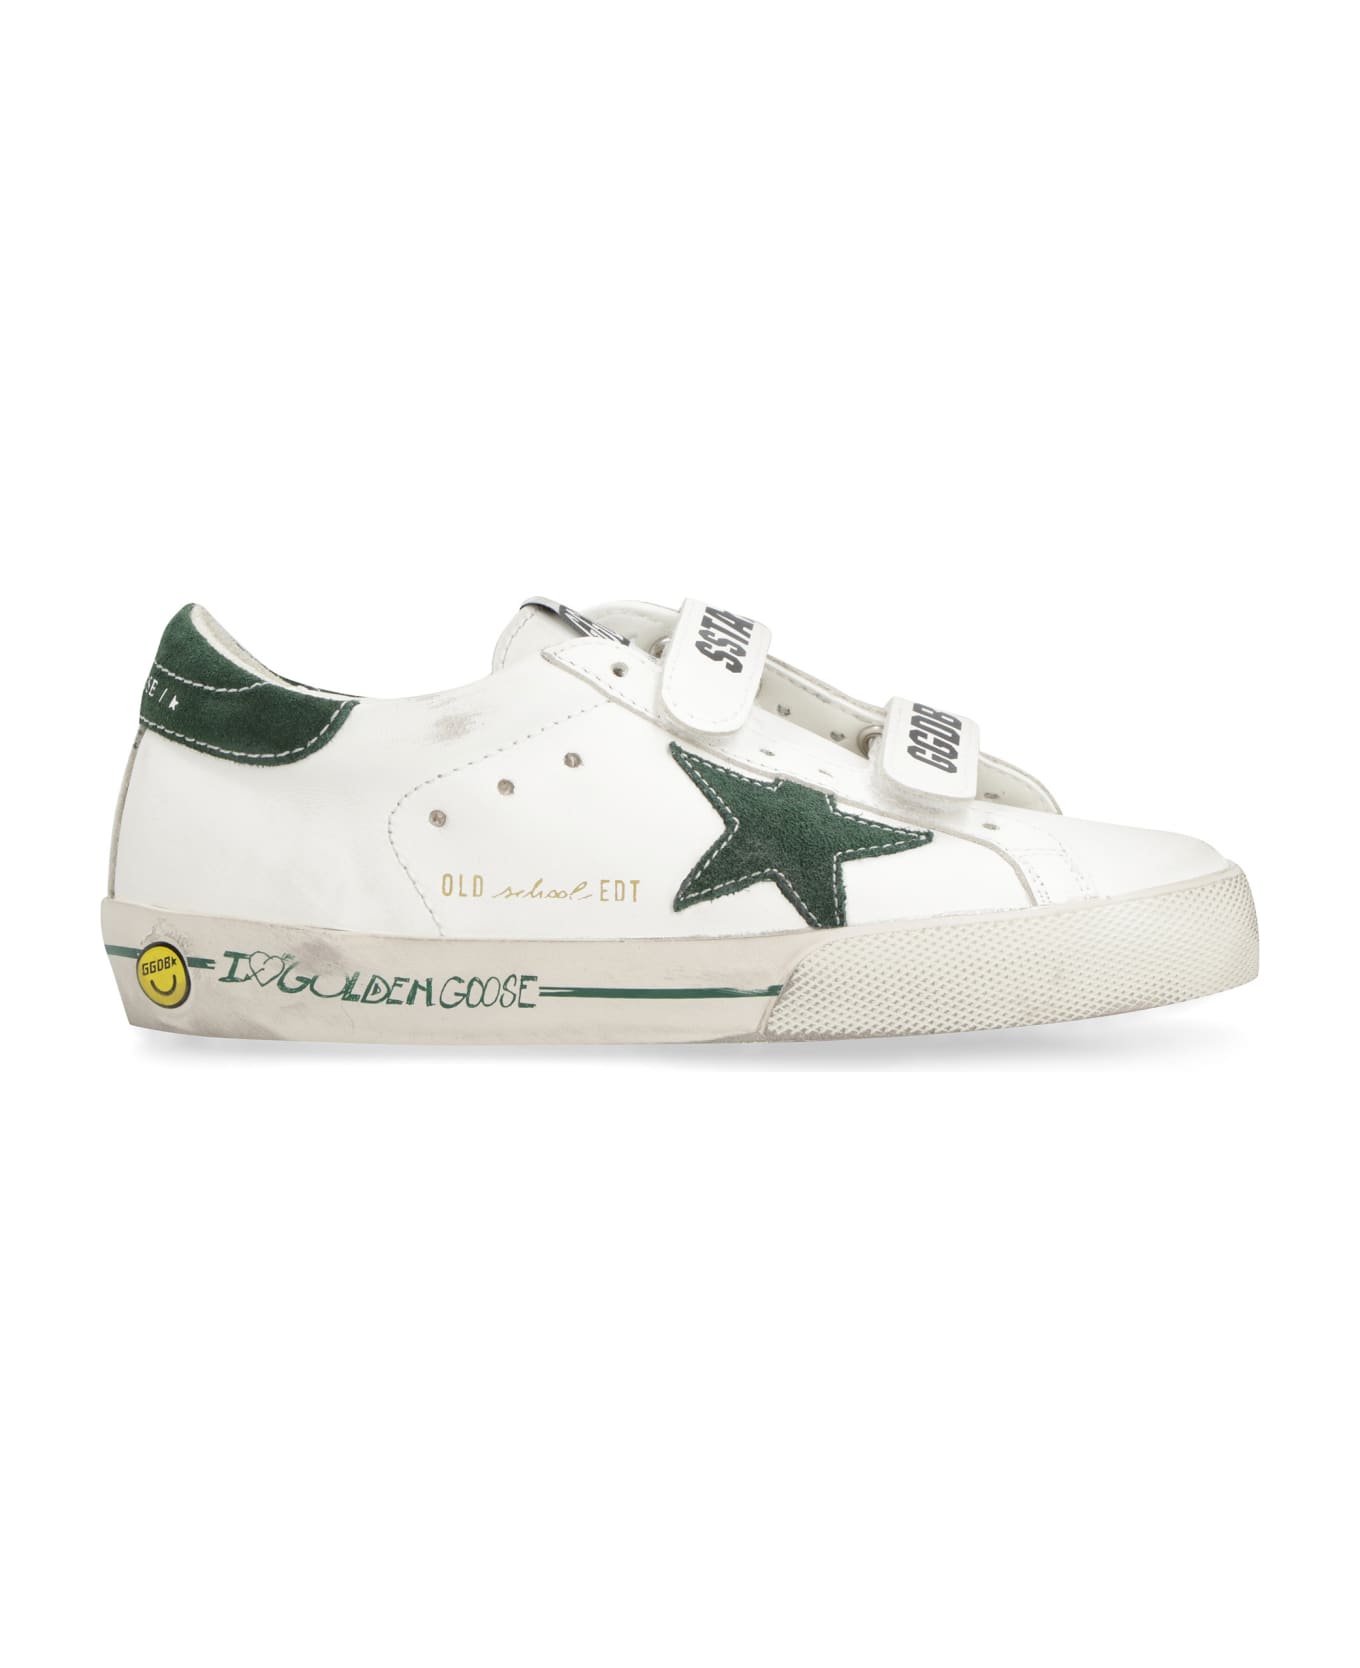 Golden Goose Old School Leather Sneakers - White